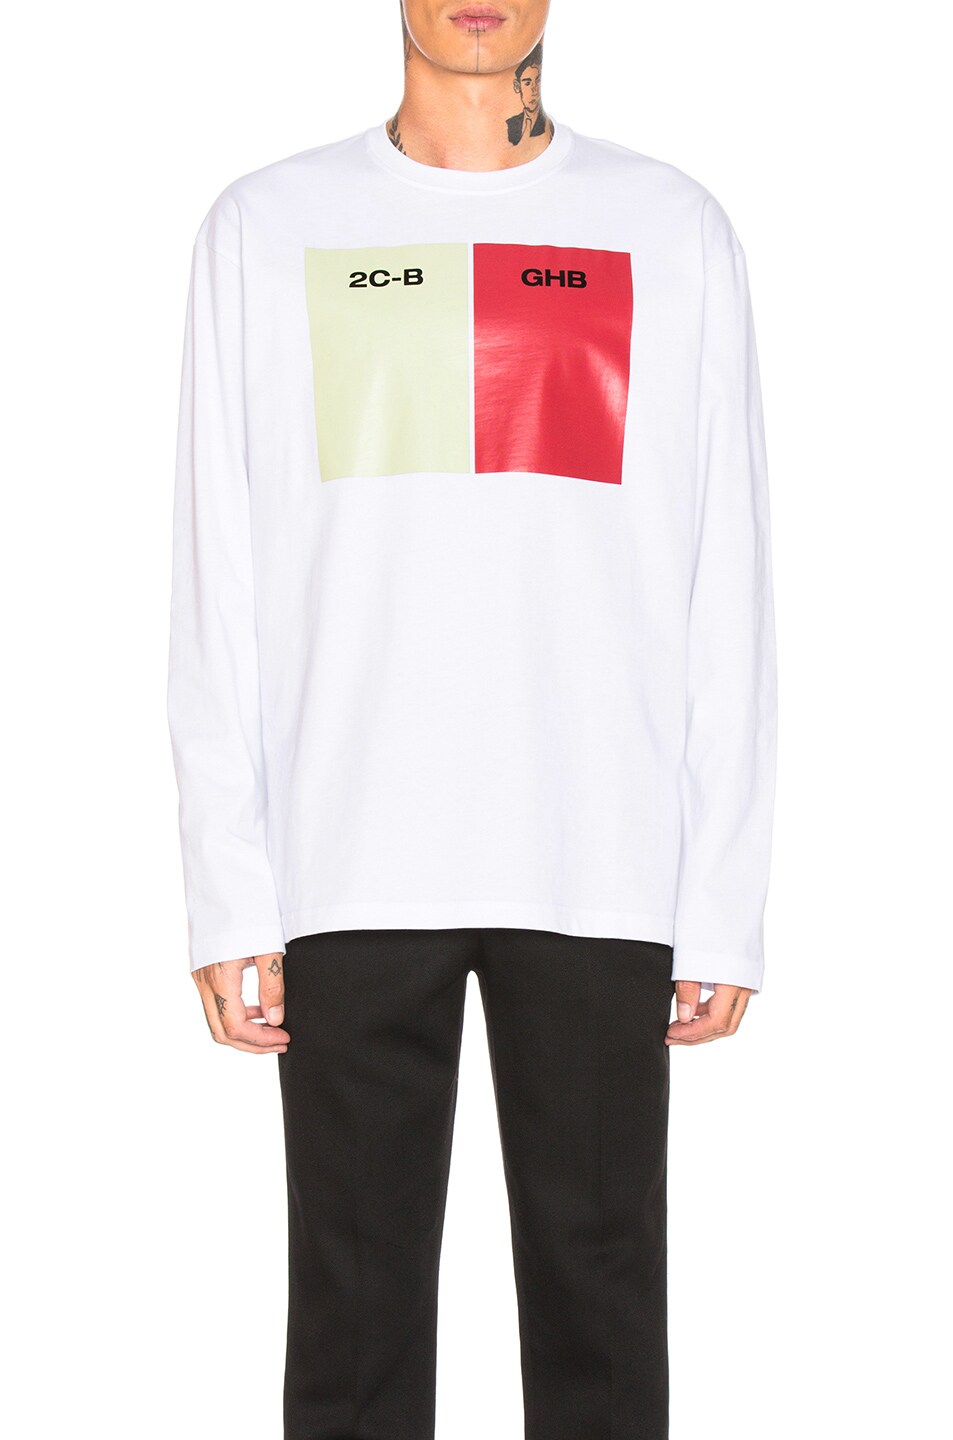 Image 1 of Raf Simons 2CB GHB Long Sleeve Tee in White